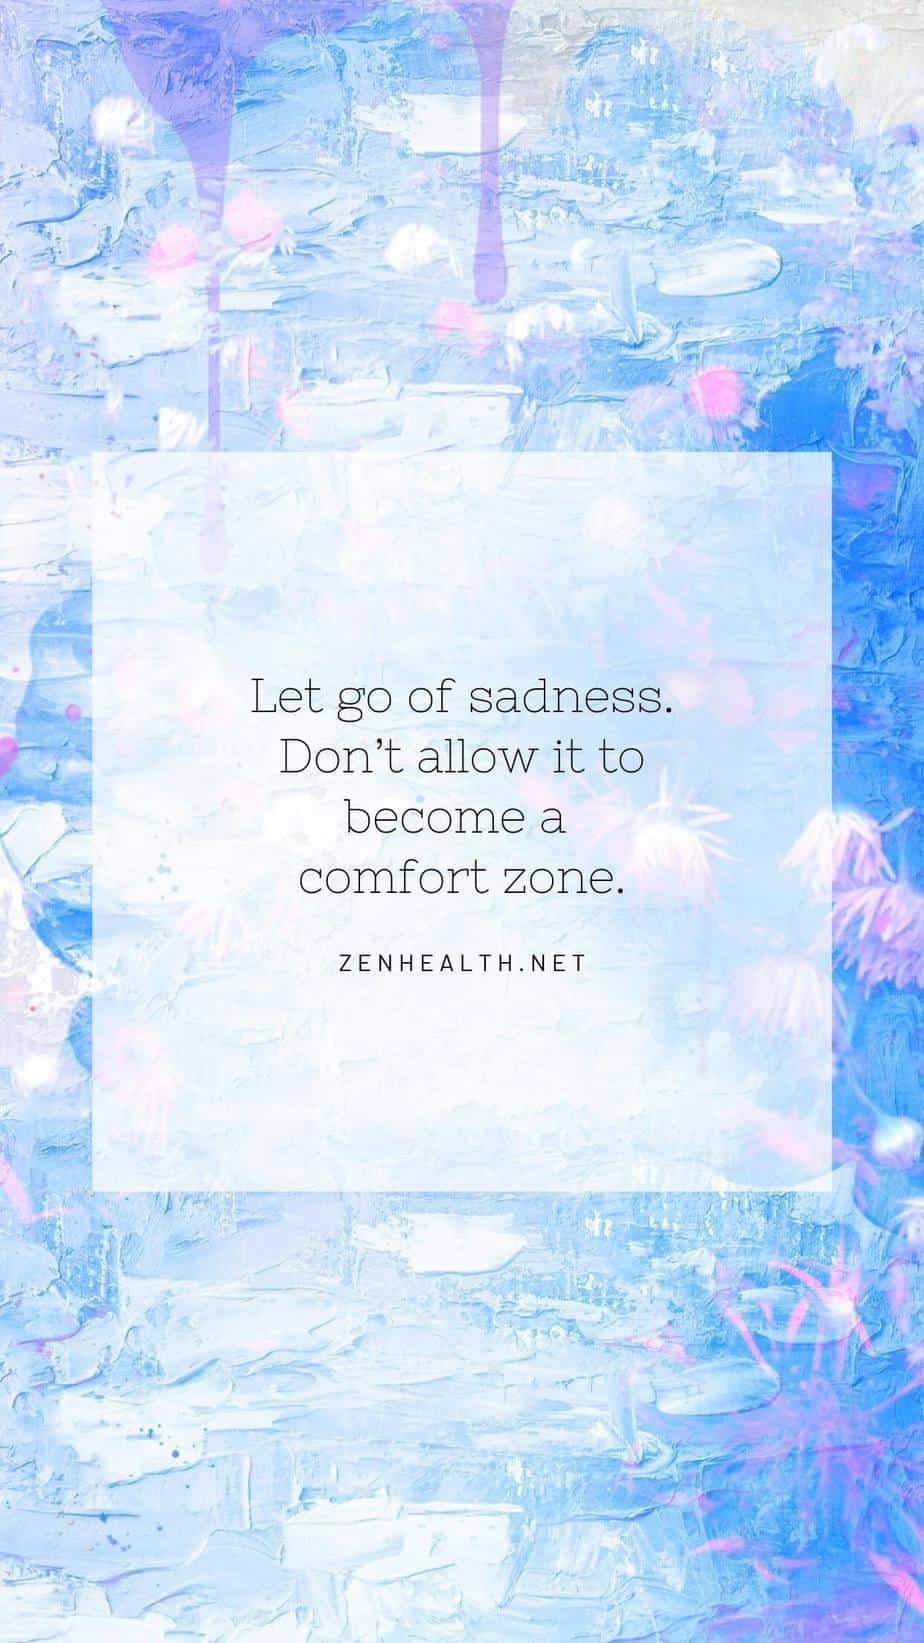 Let go of sadness. Don't allow it to become a comfort zone.